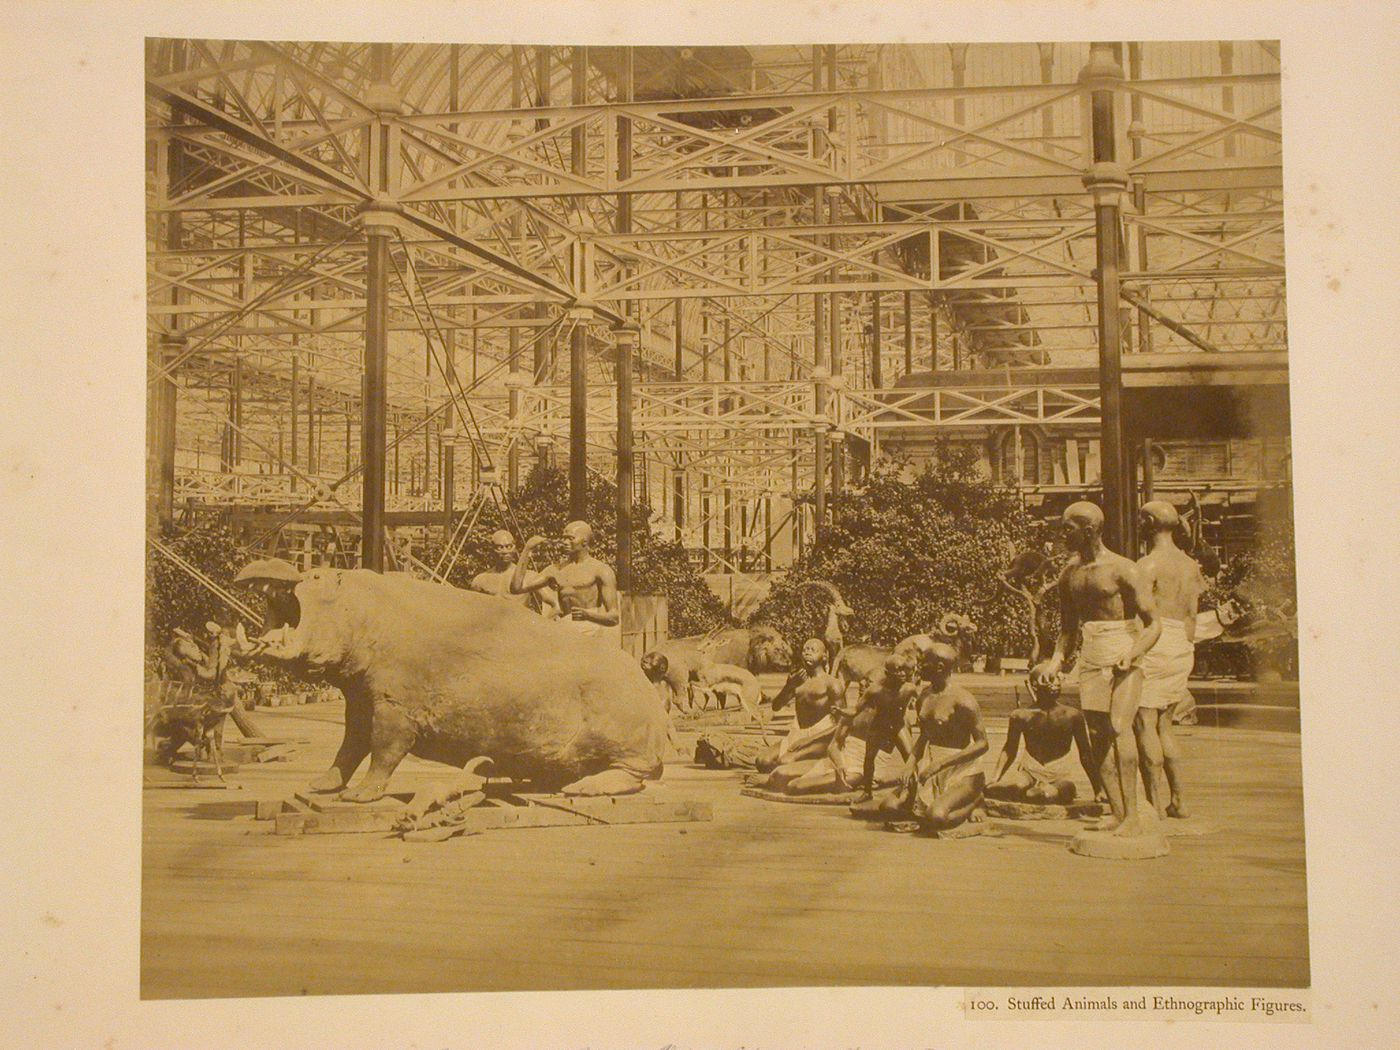 Taxidermy animals and ethnographic figures, Crystal Palace, Sydenham, England